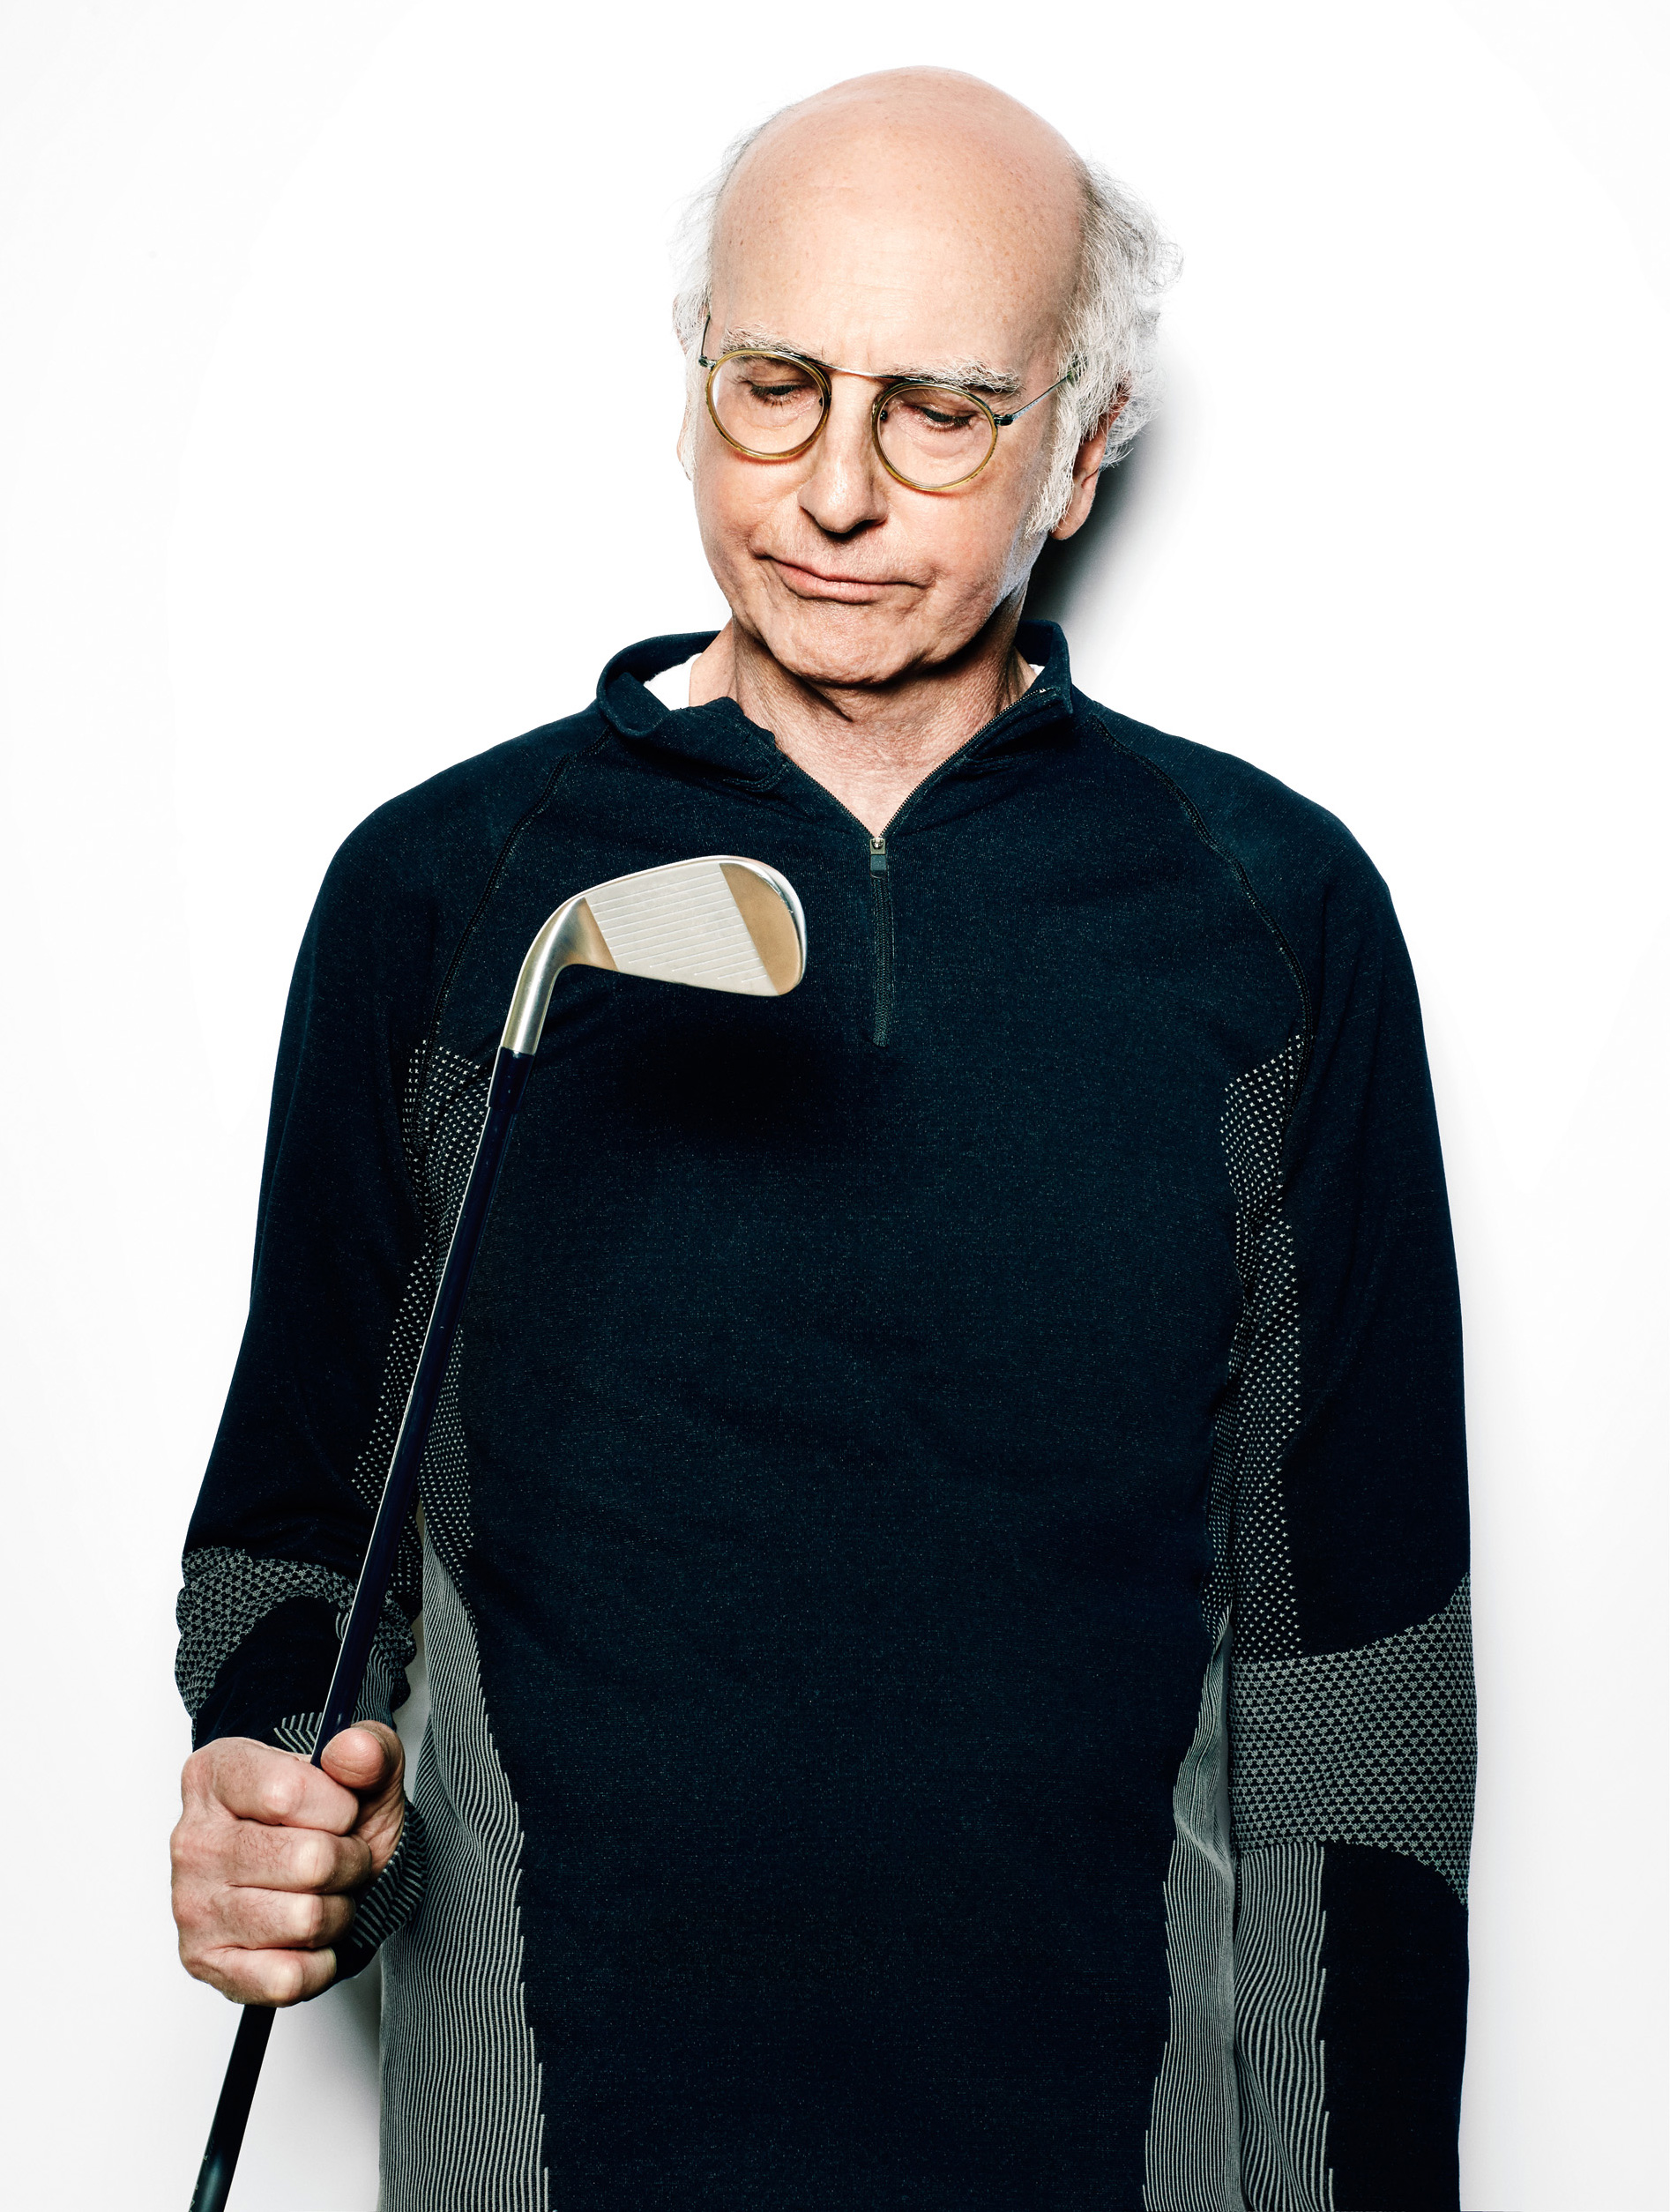 larry david with hair